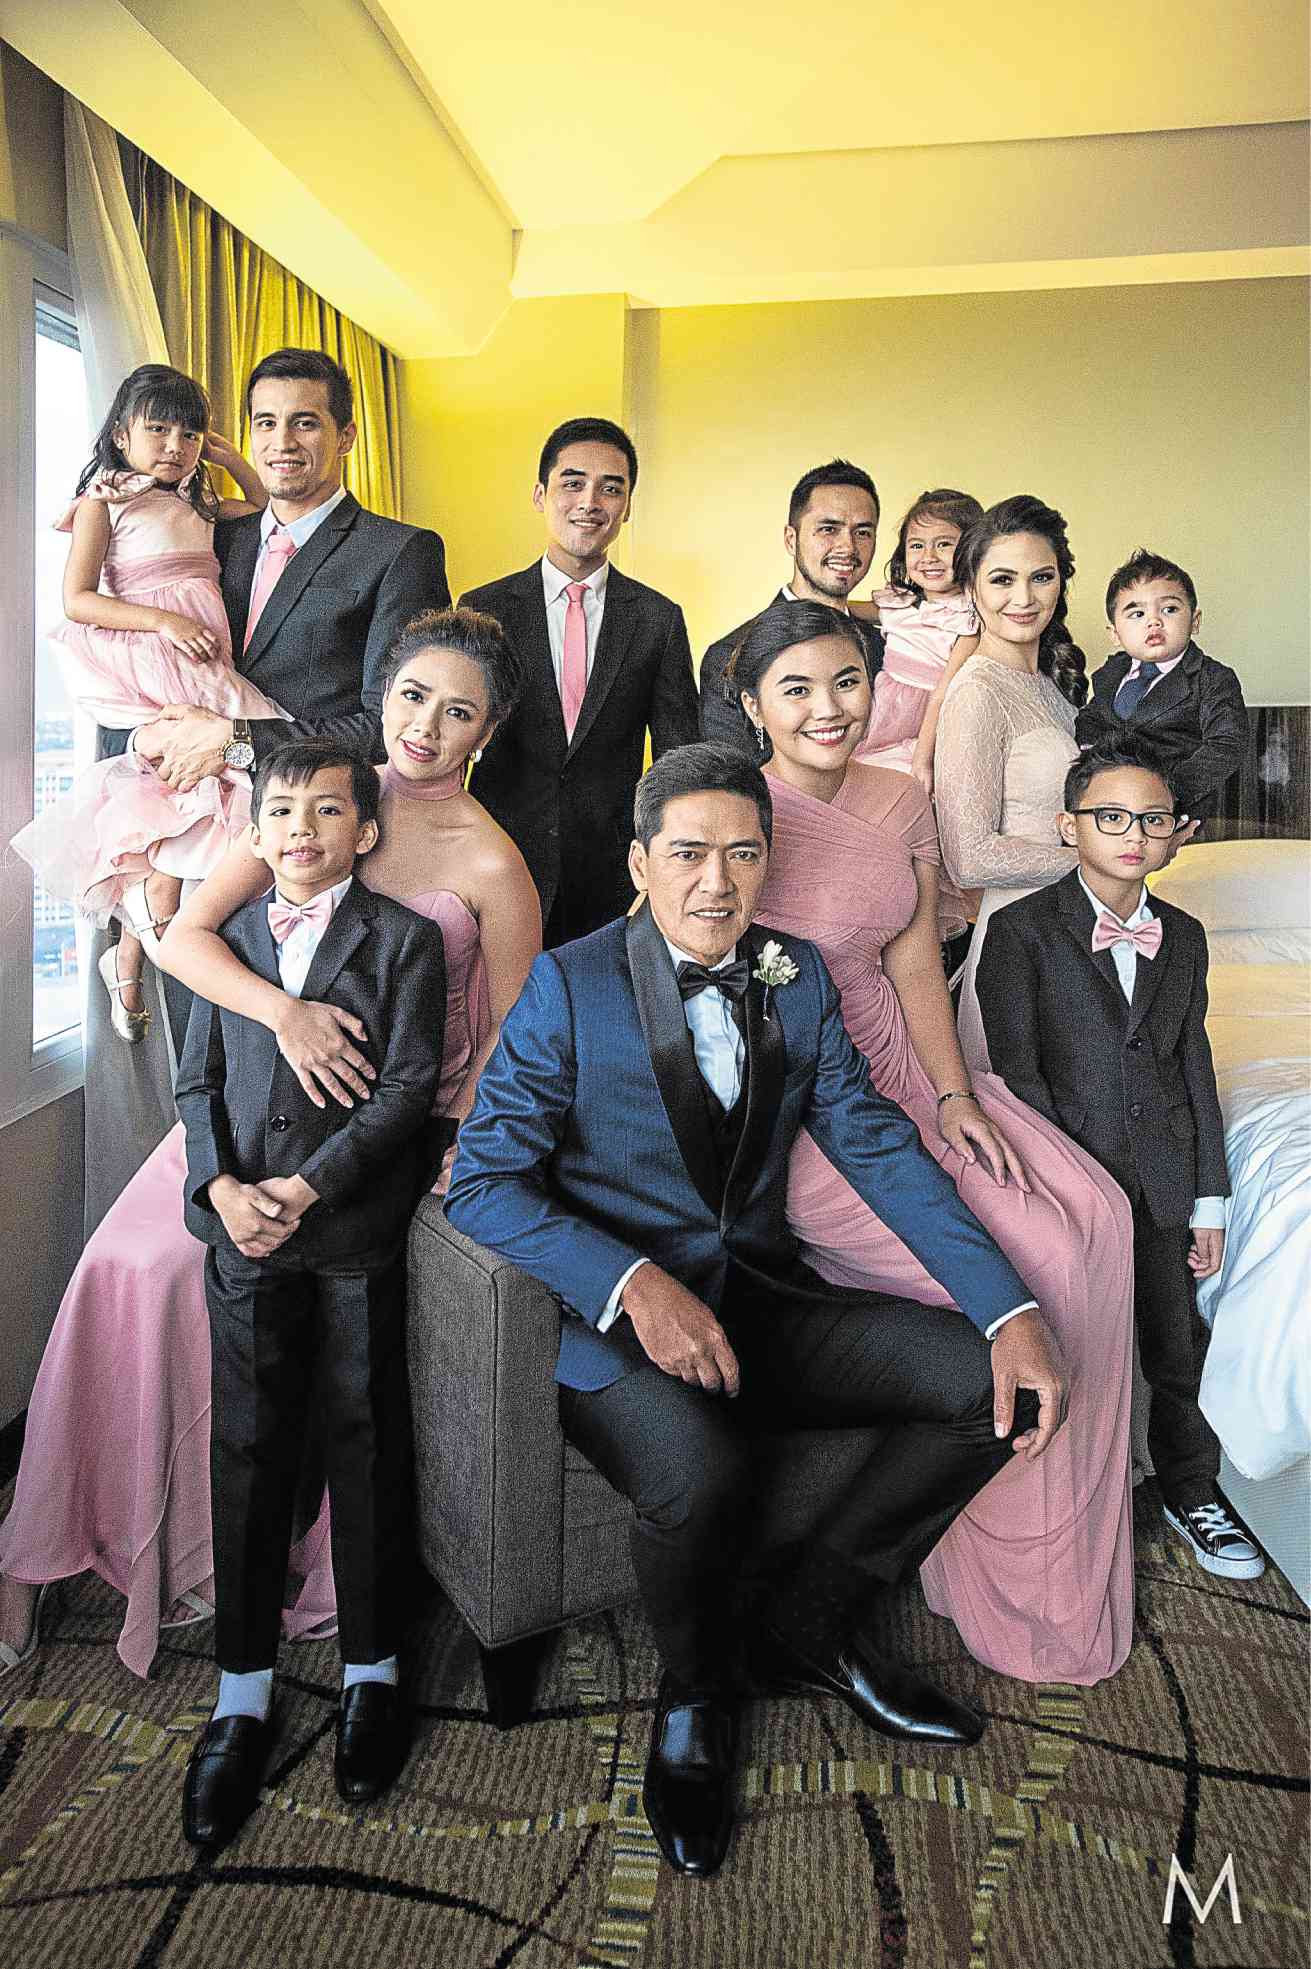 THE GROOM with his children and grandchildren